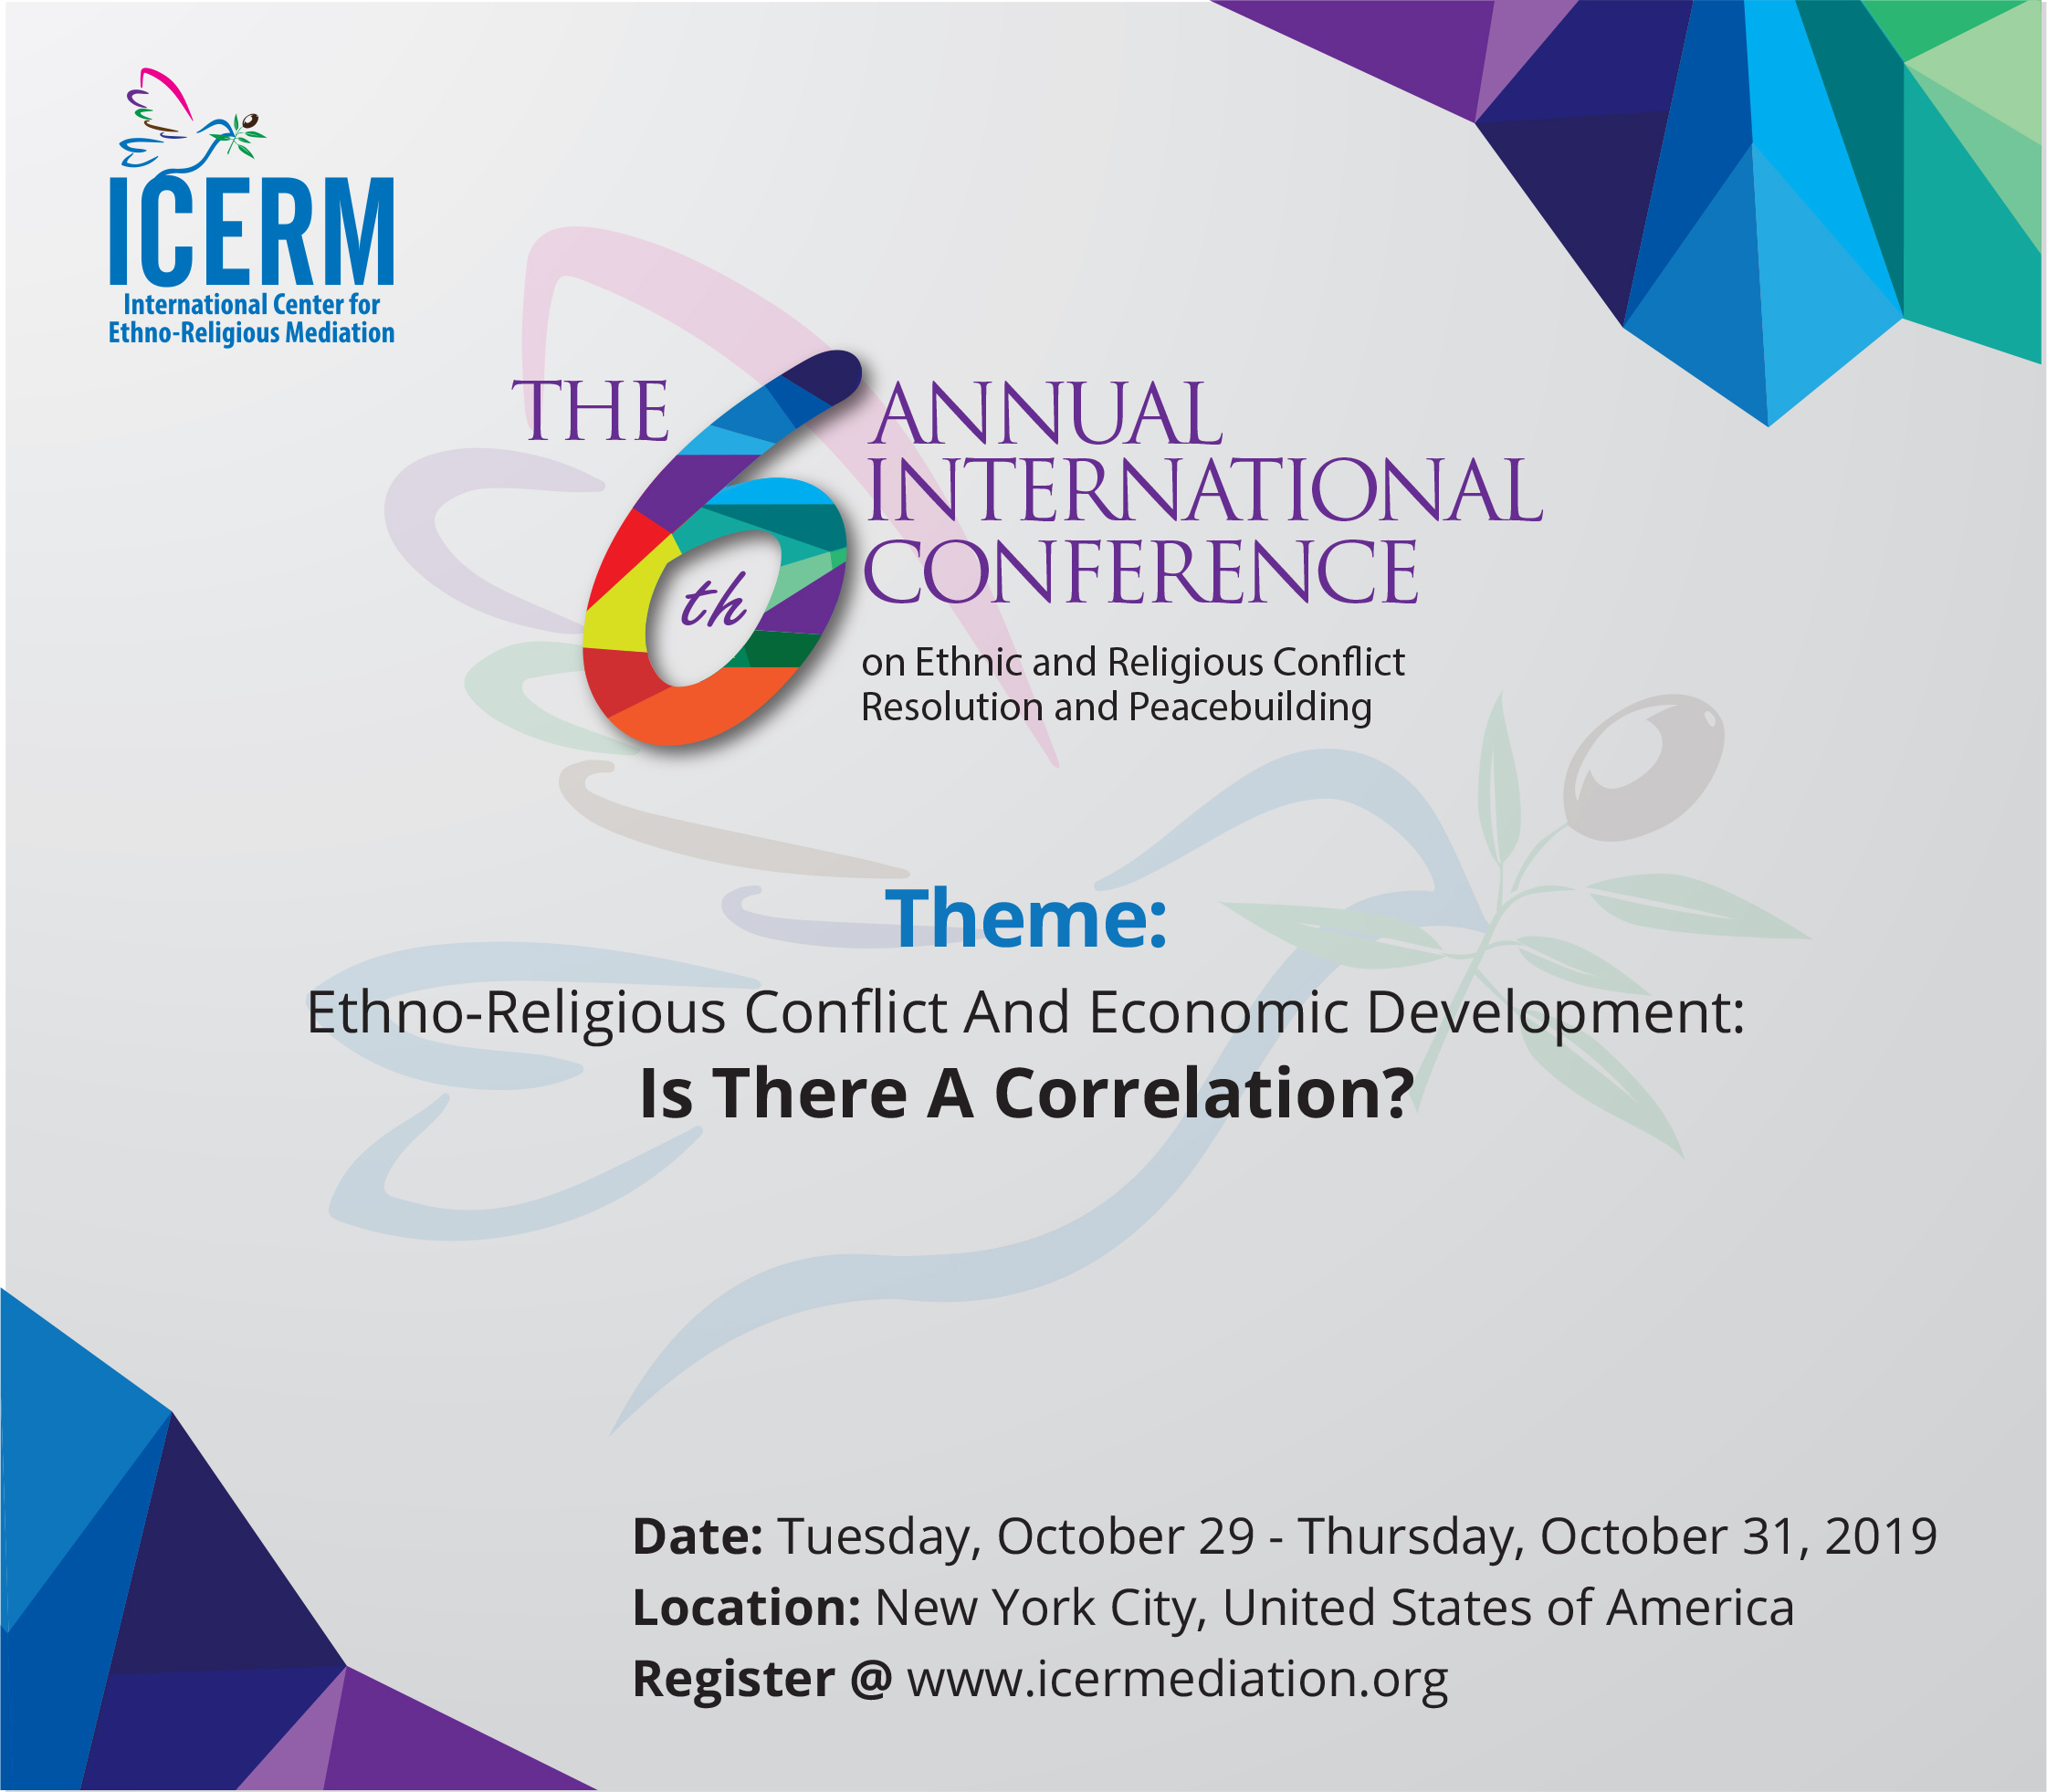 6th Annual International Conference on Ethnic and Religious Conflict Resolution and Peacebuilding 